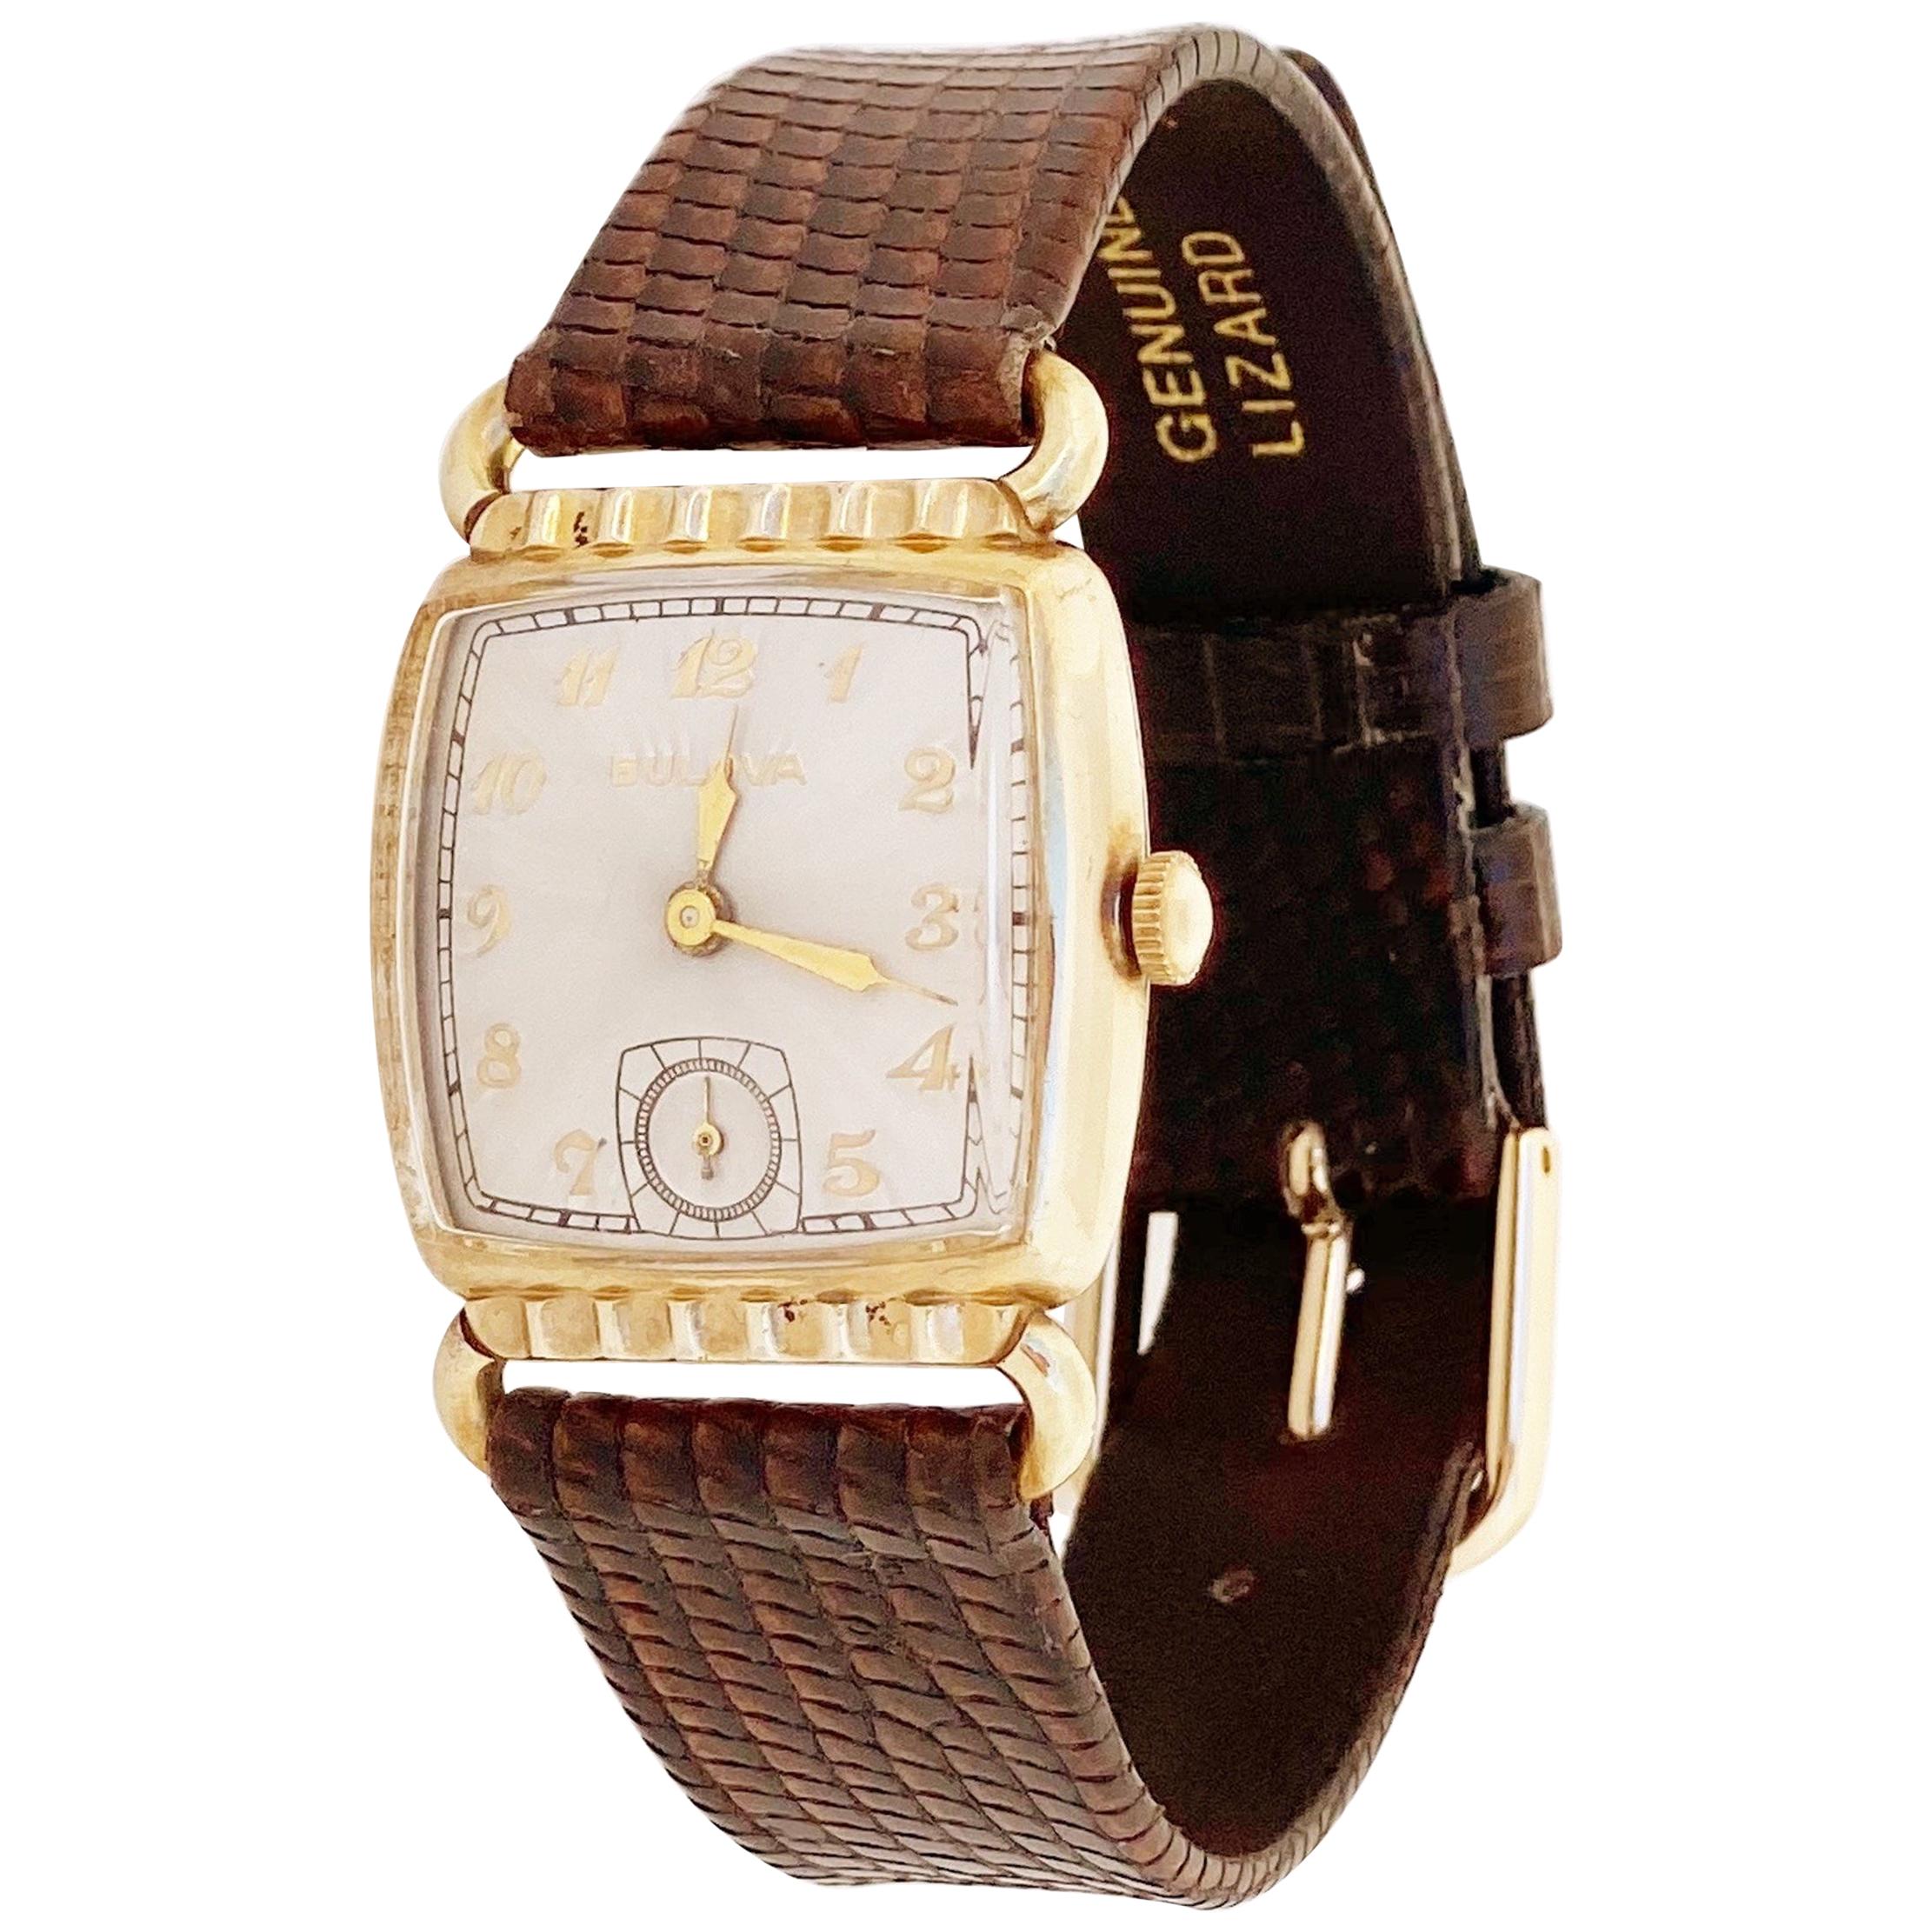 Gold Plated Art Deco Style Watch with Lizard Leather Strap by Bulova, 1953